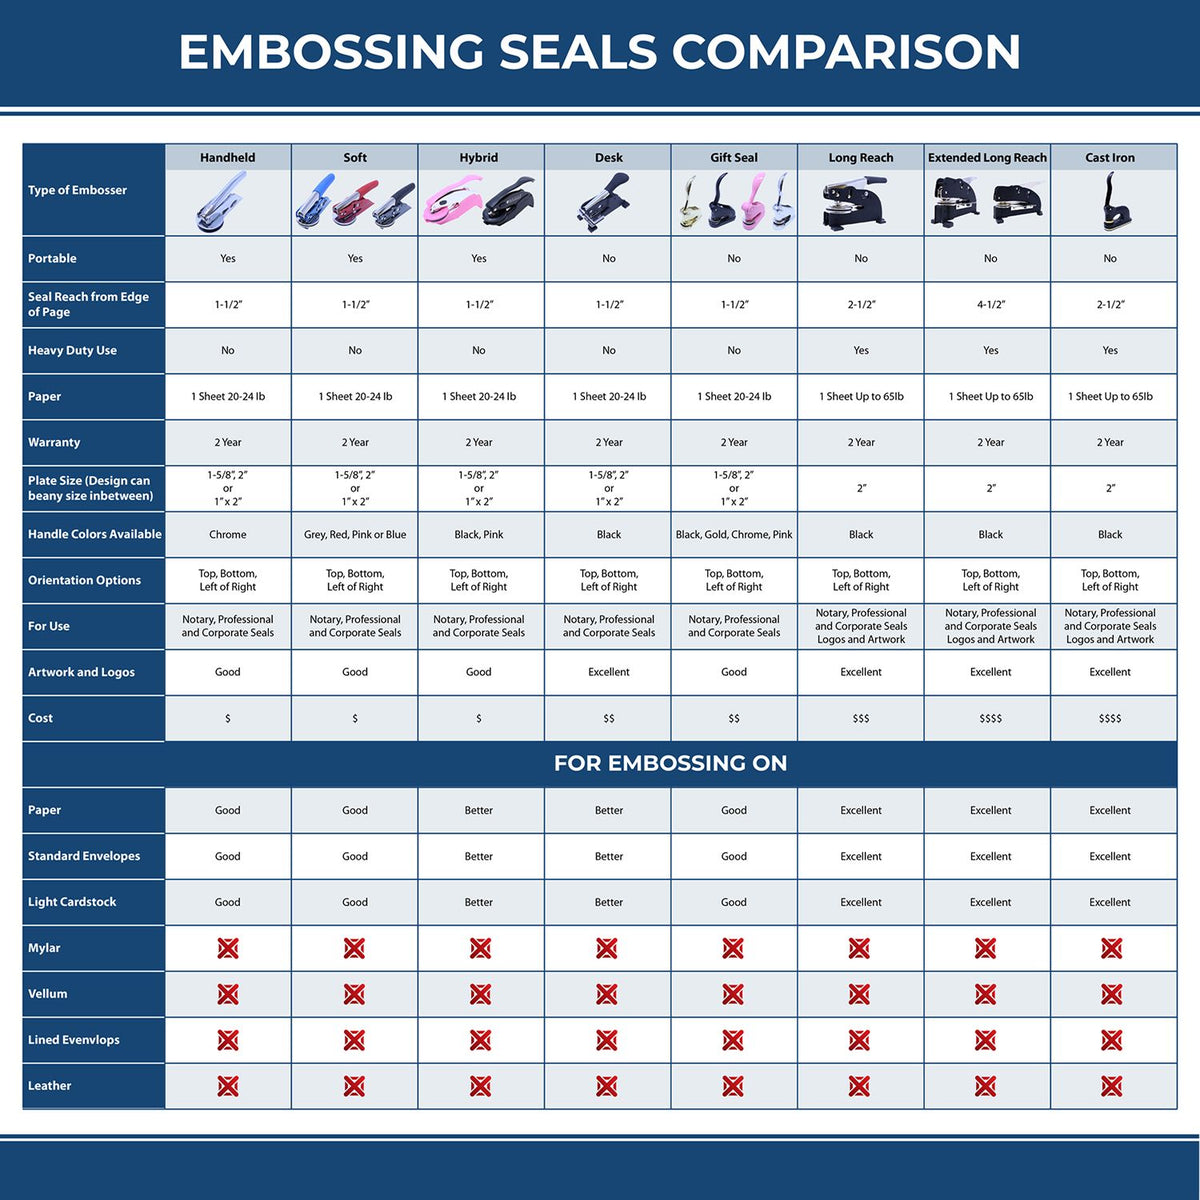 A comparison chart for the different types of mount models available for the Long Reach New Jersey PE Seal.